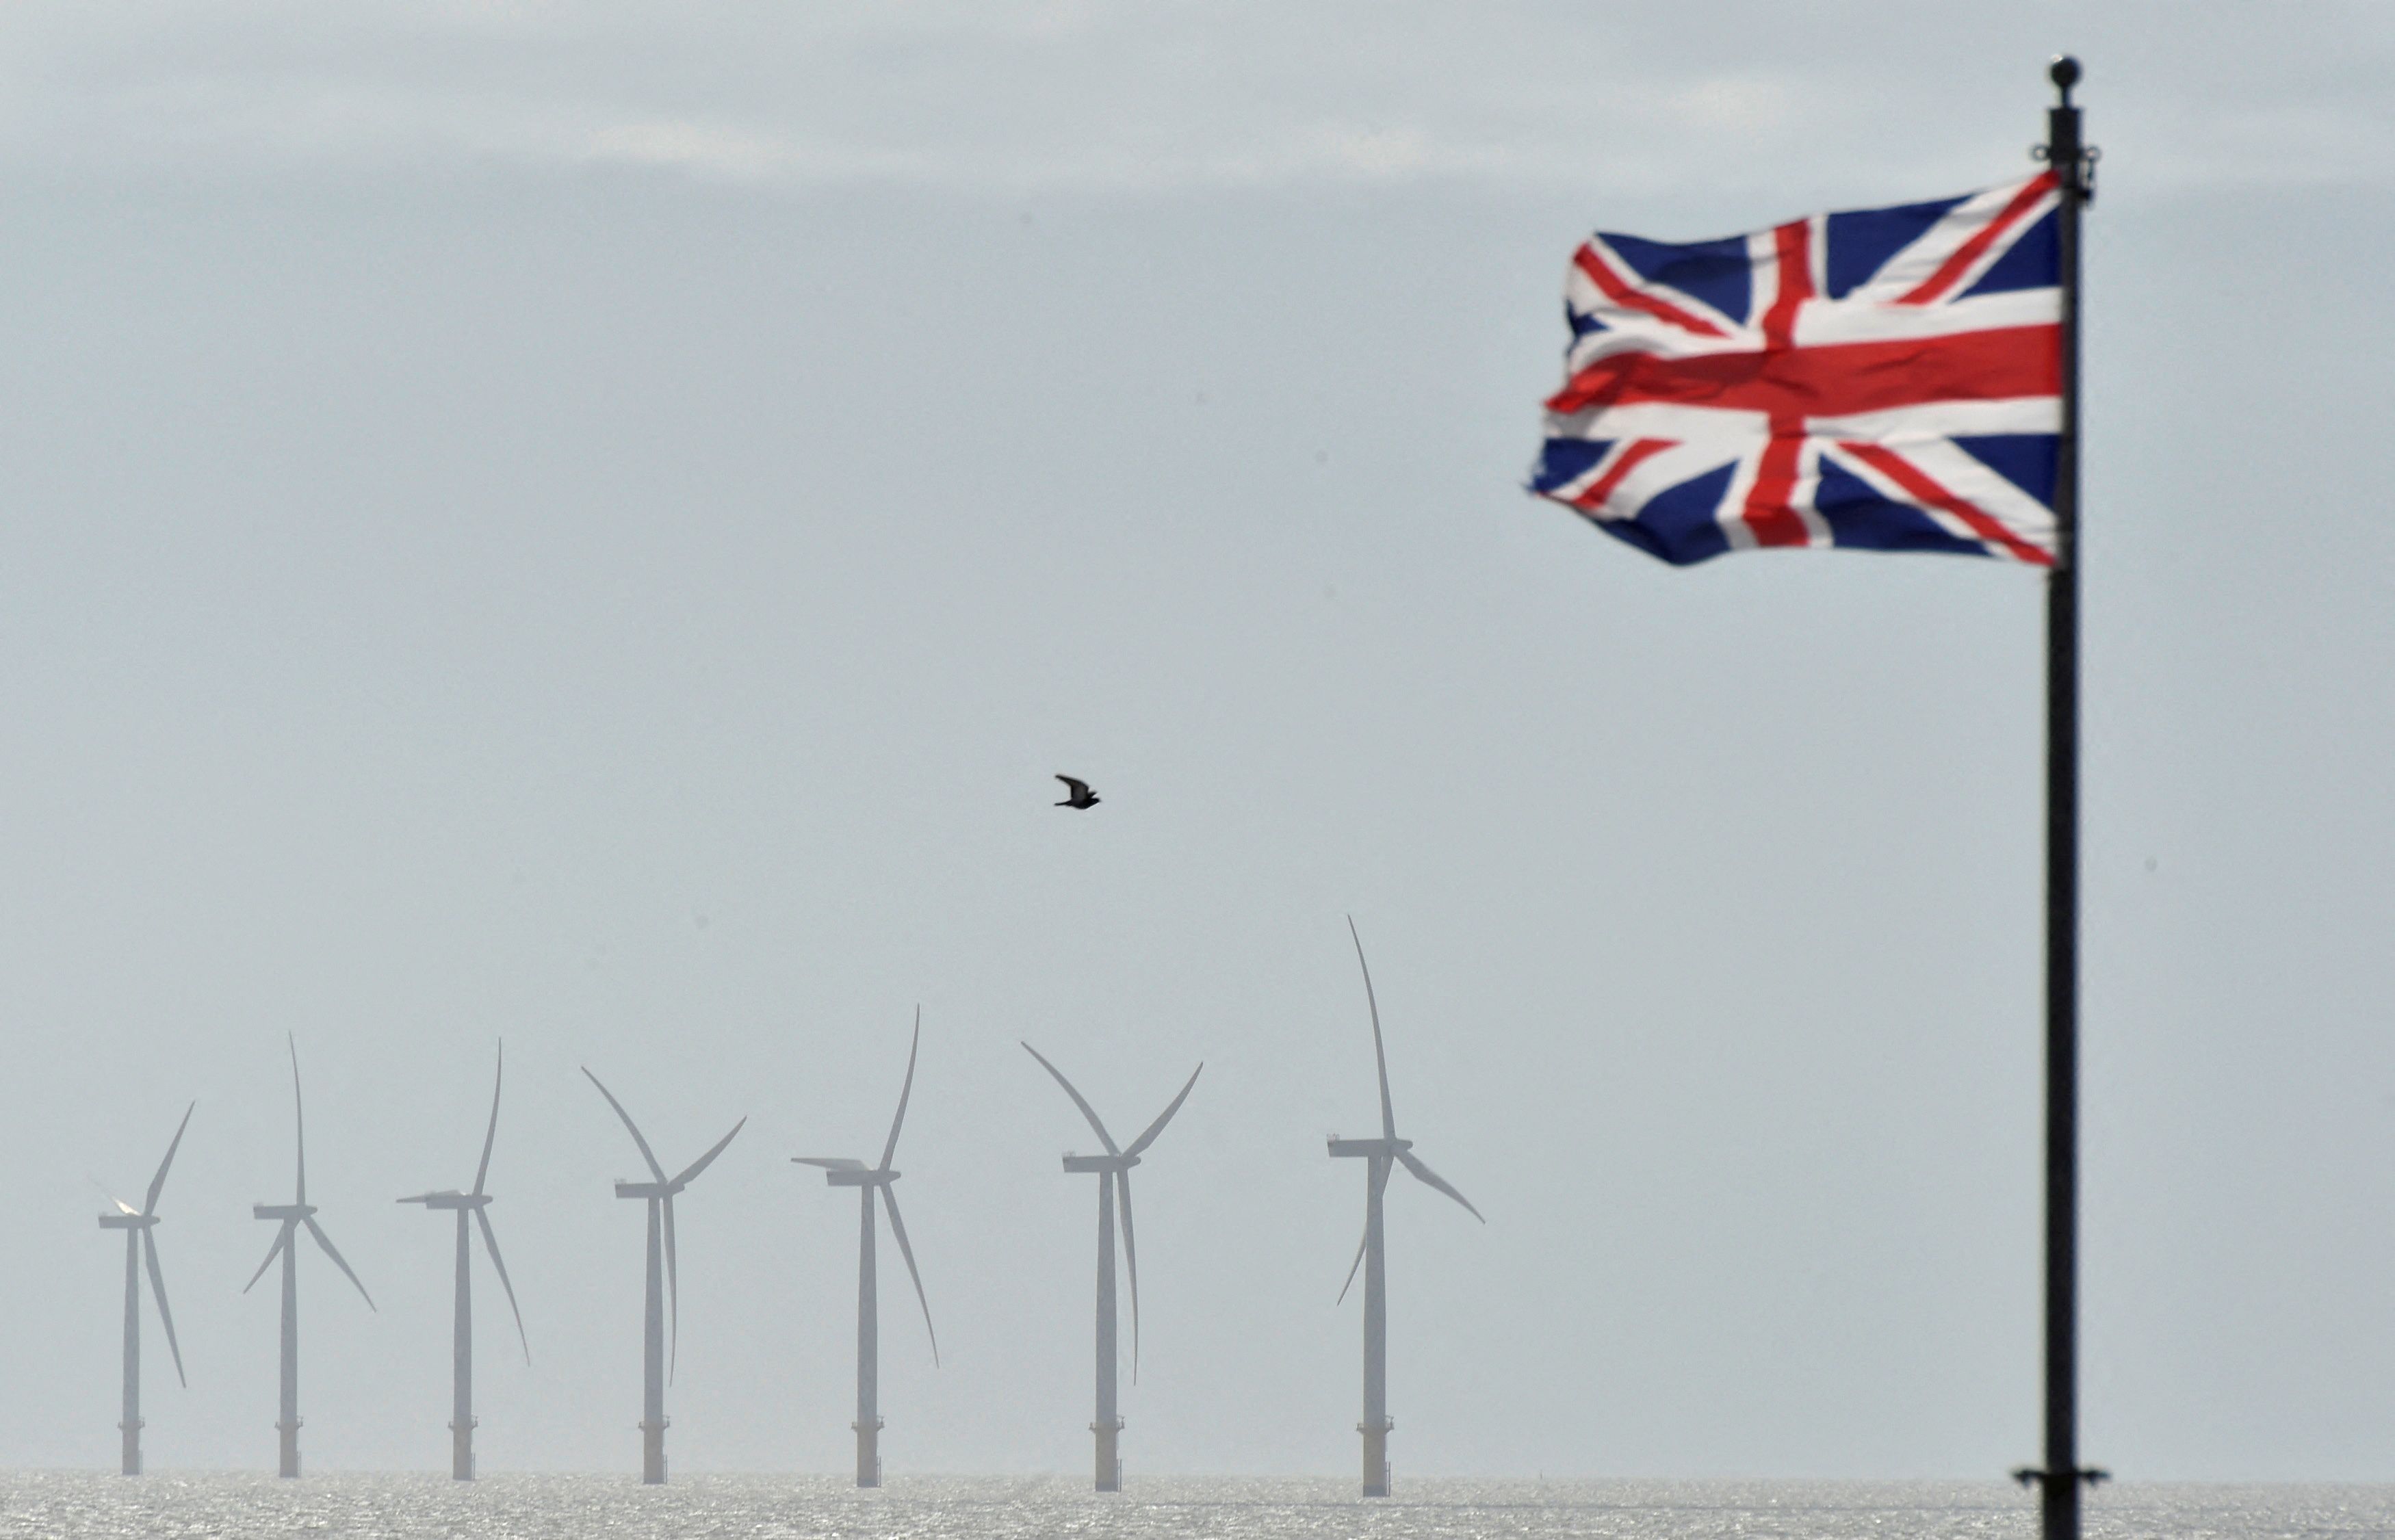 An off-shore wind farm is seen in the English Channel near Clacton-on-Sea in England